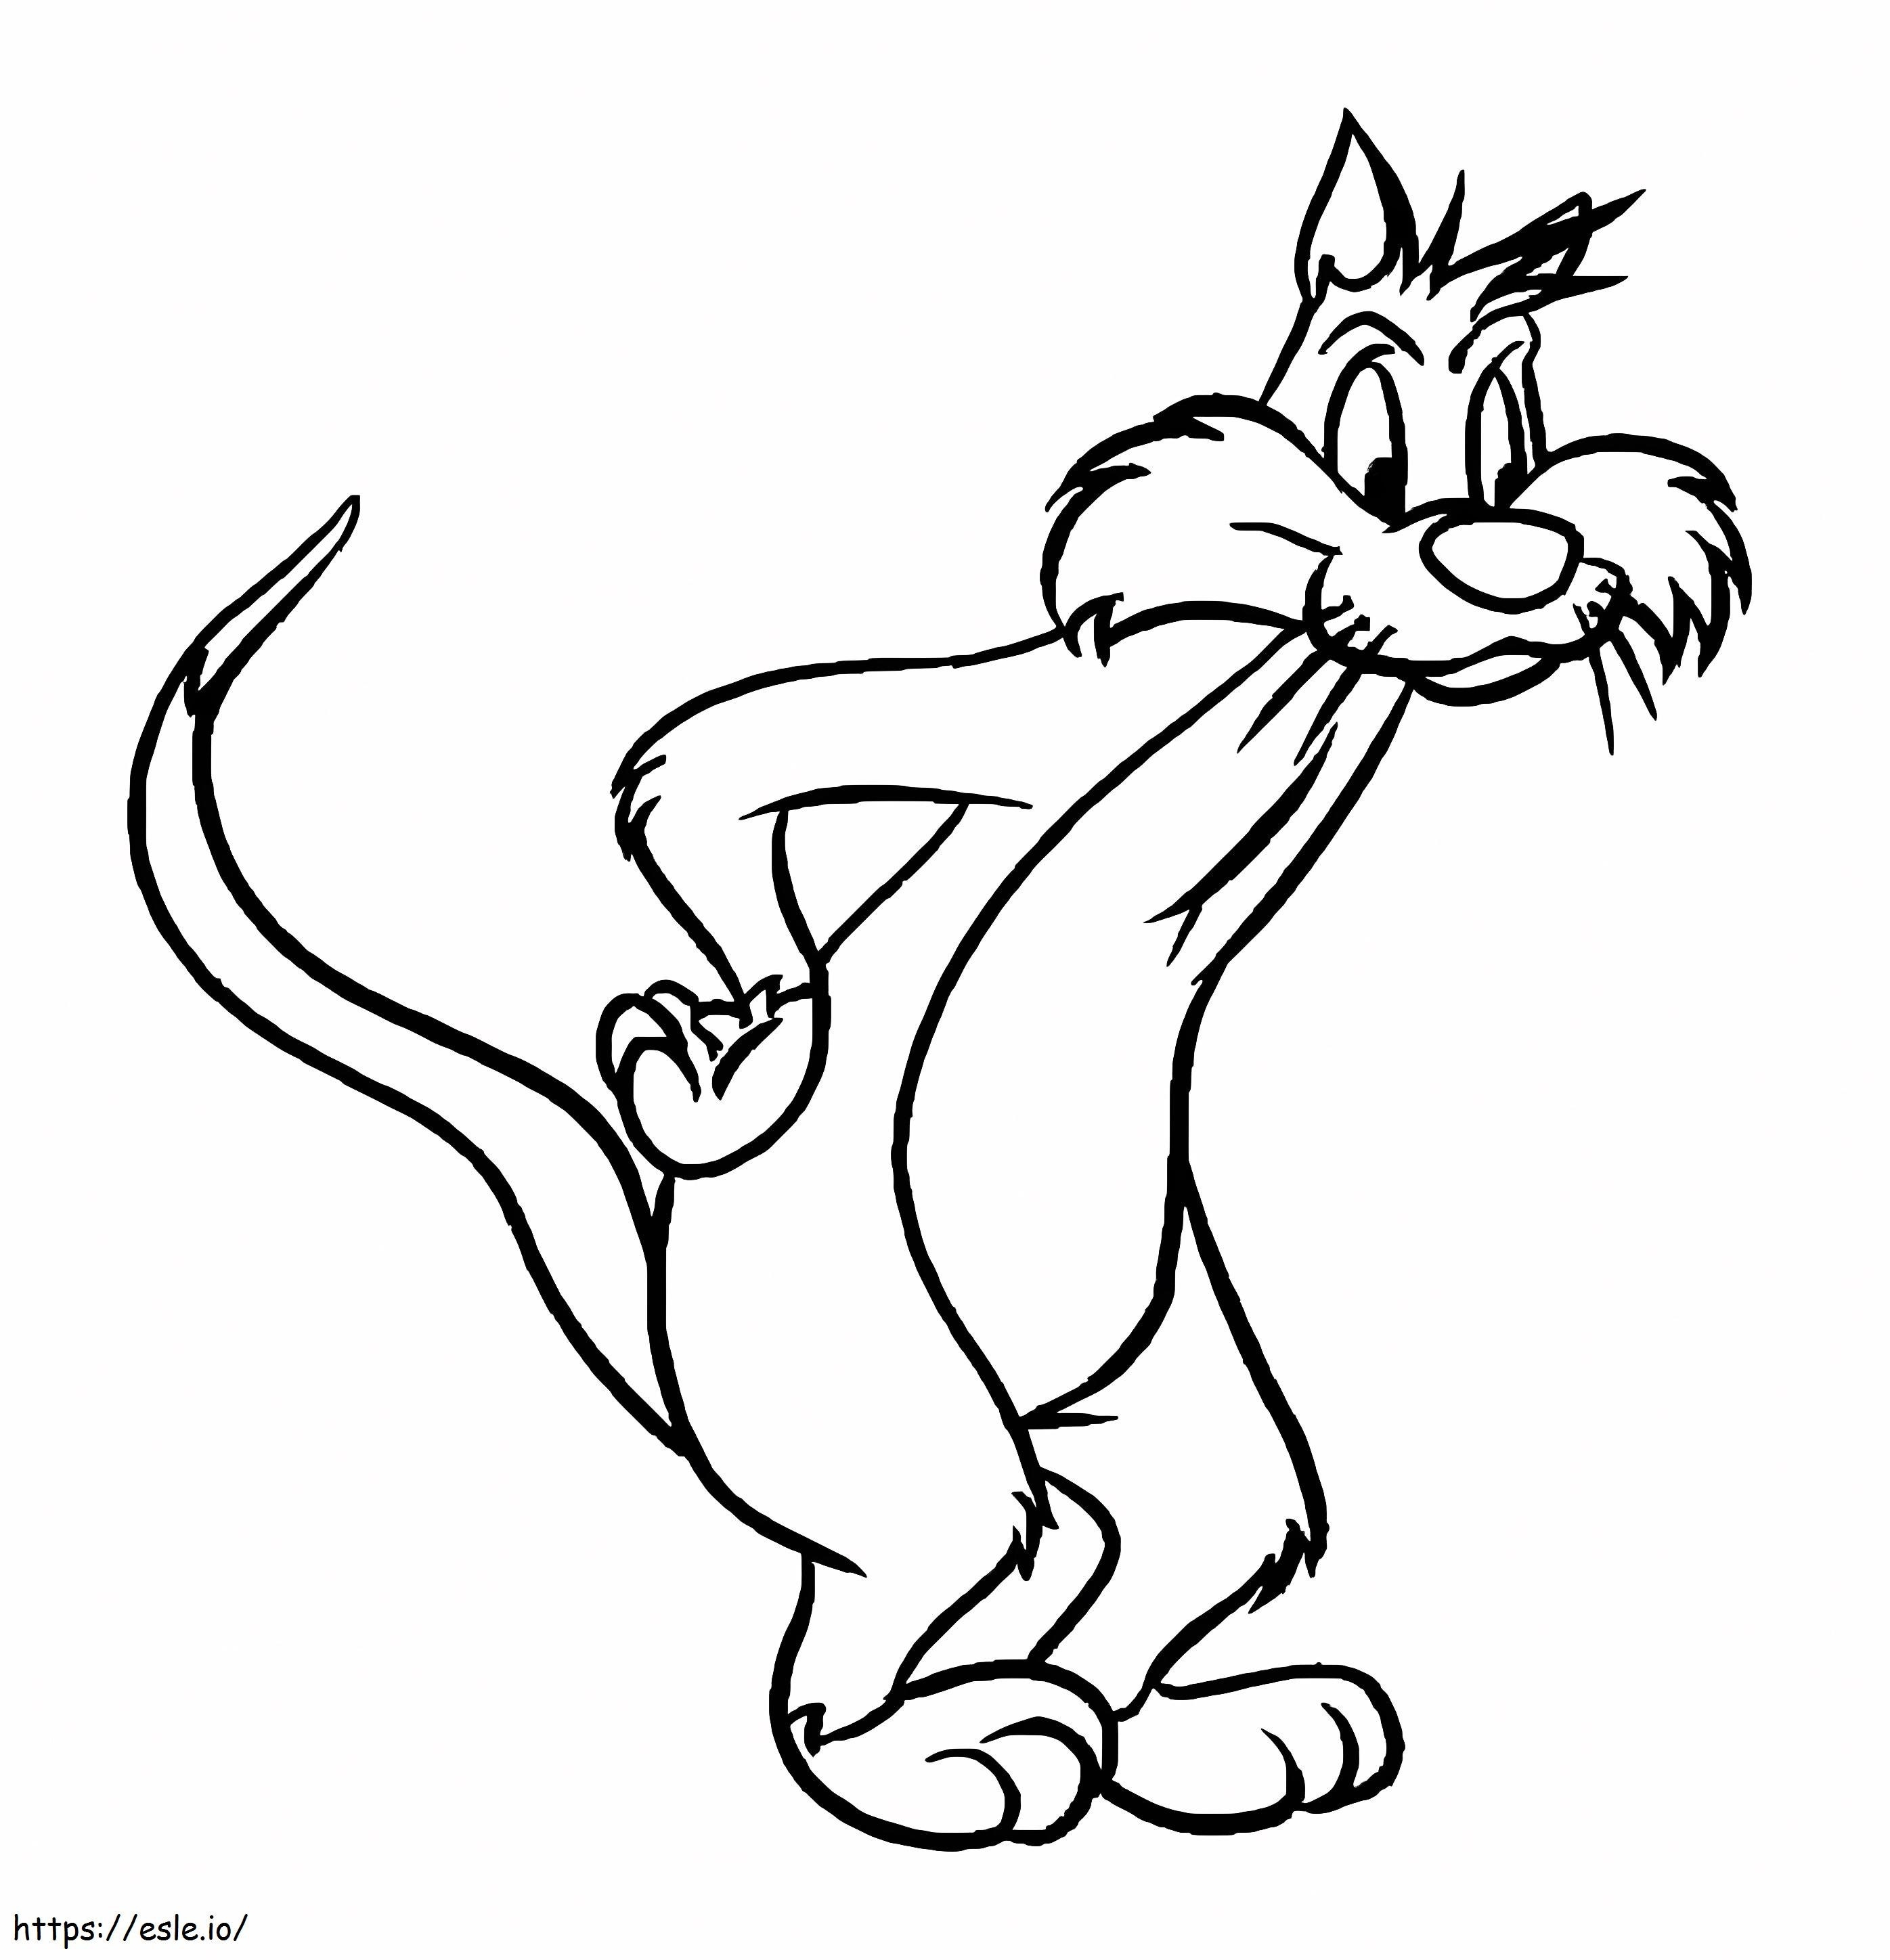 Sylvester 3 coloring page